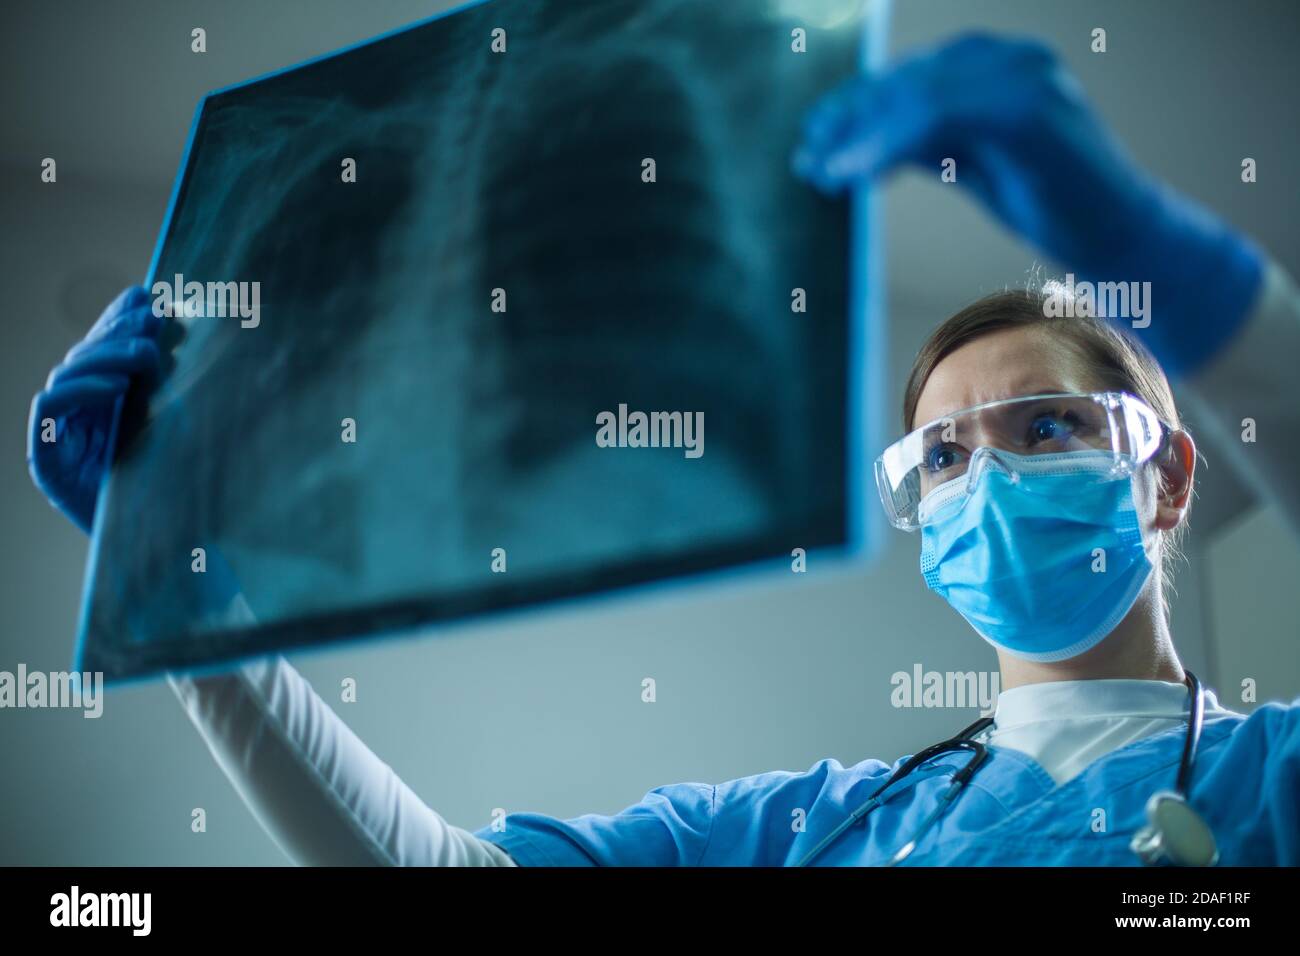 Female pulmonologist or oncologist holding chest X-ray scan,inspecting COVID-19 patient lungs,wearing PPE uniform,Coronavirus acute respiratory virus Stock Photo